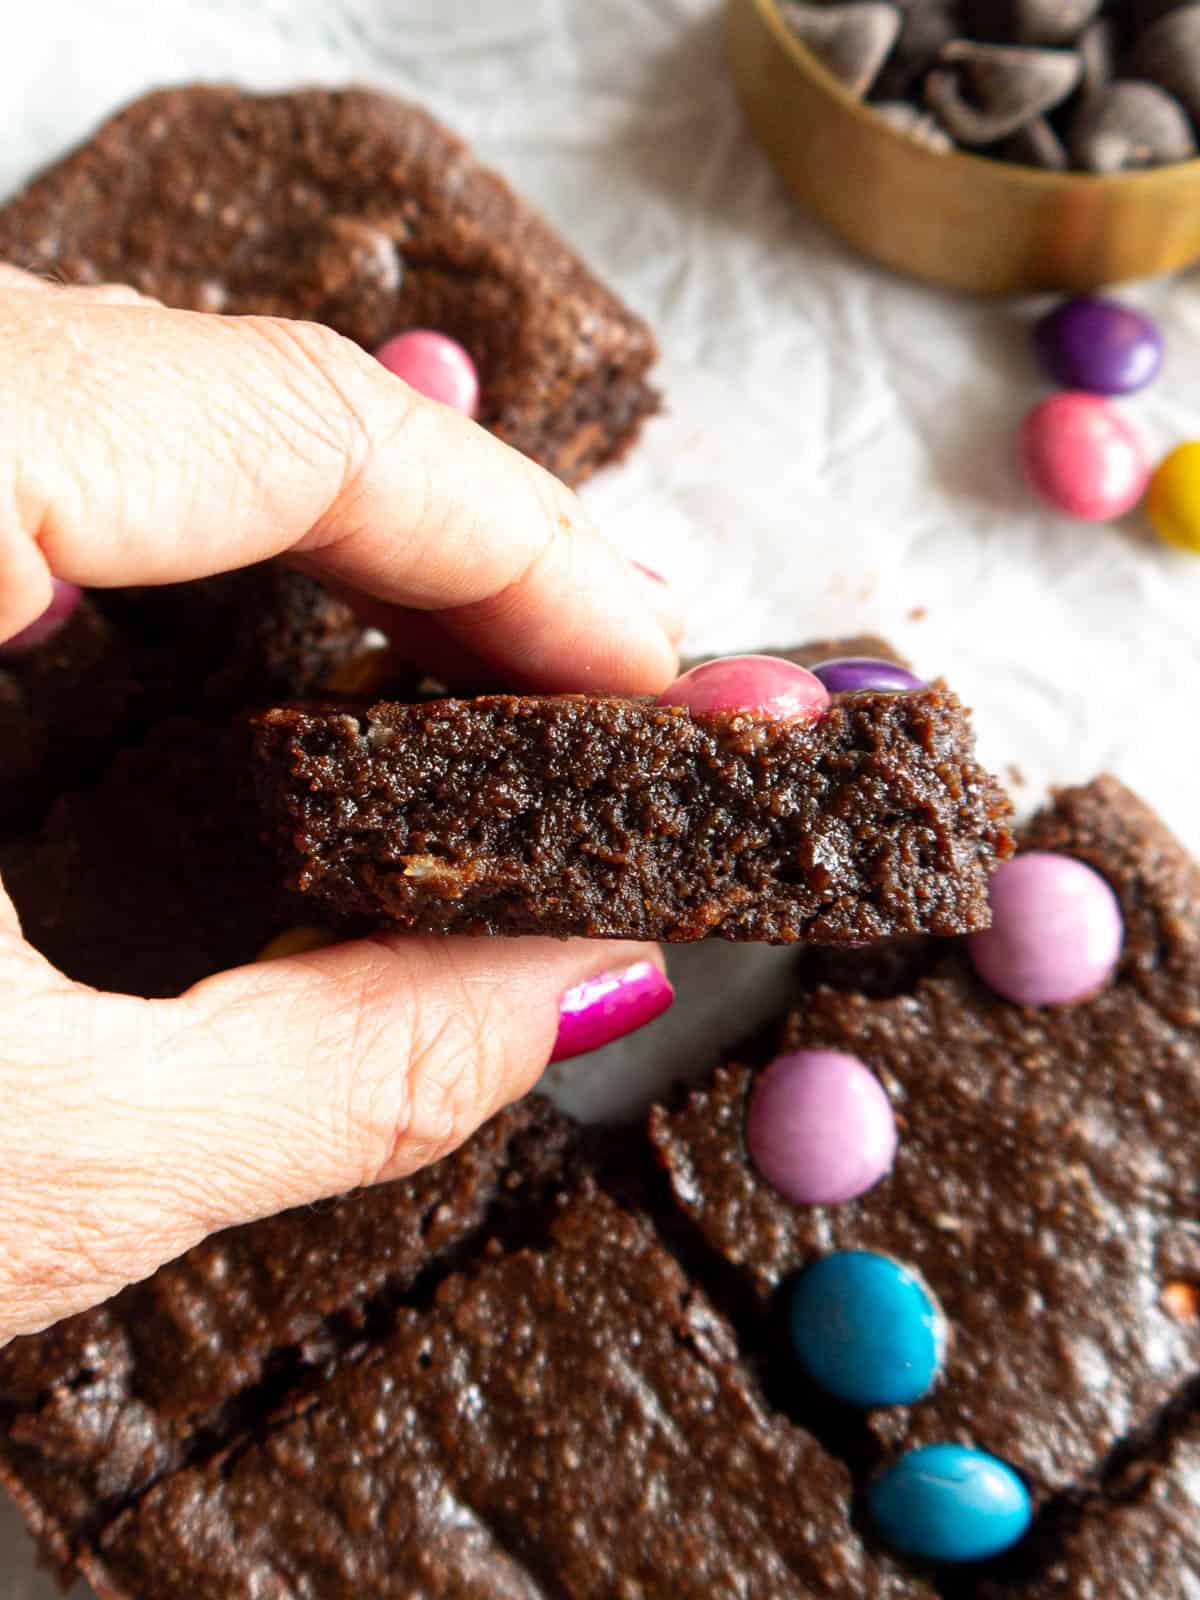 A slice of gluten free brownies made with almond flour in someone's hands.